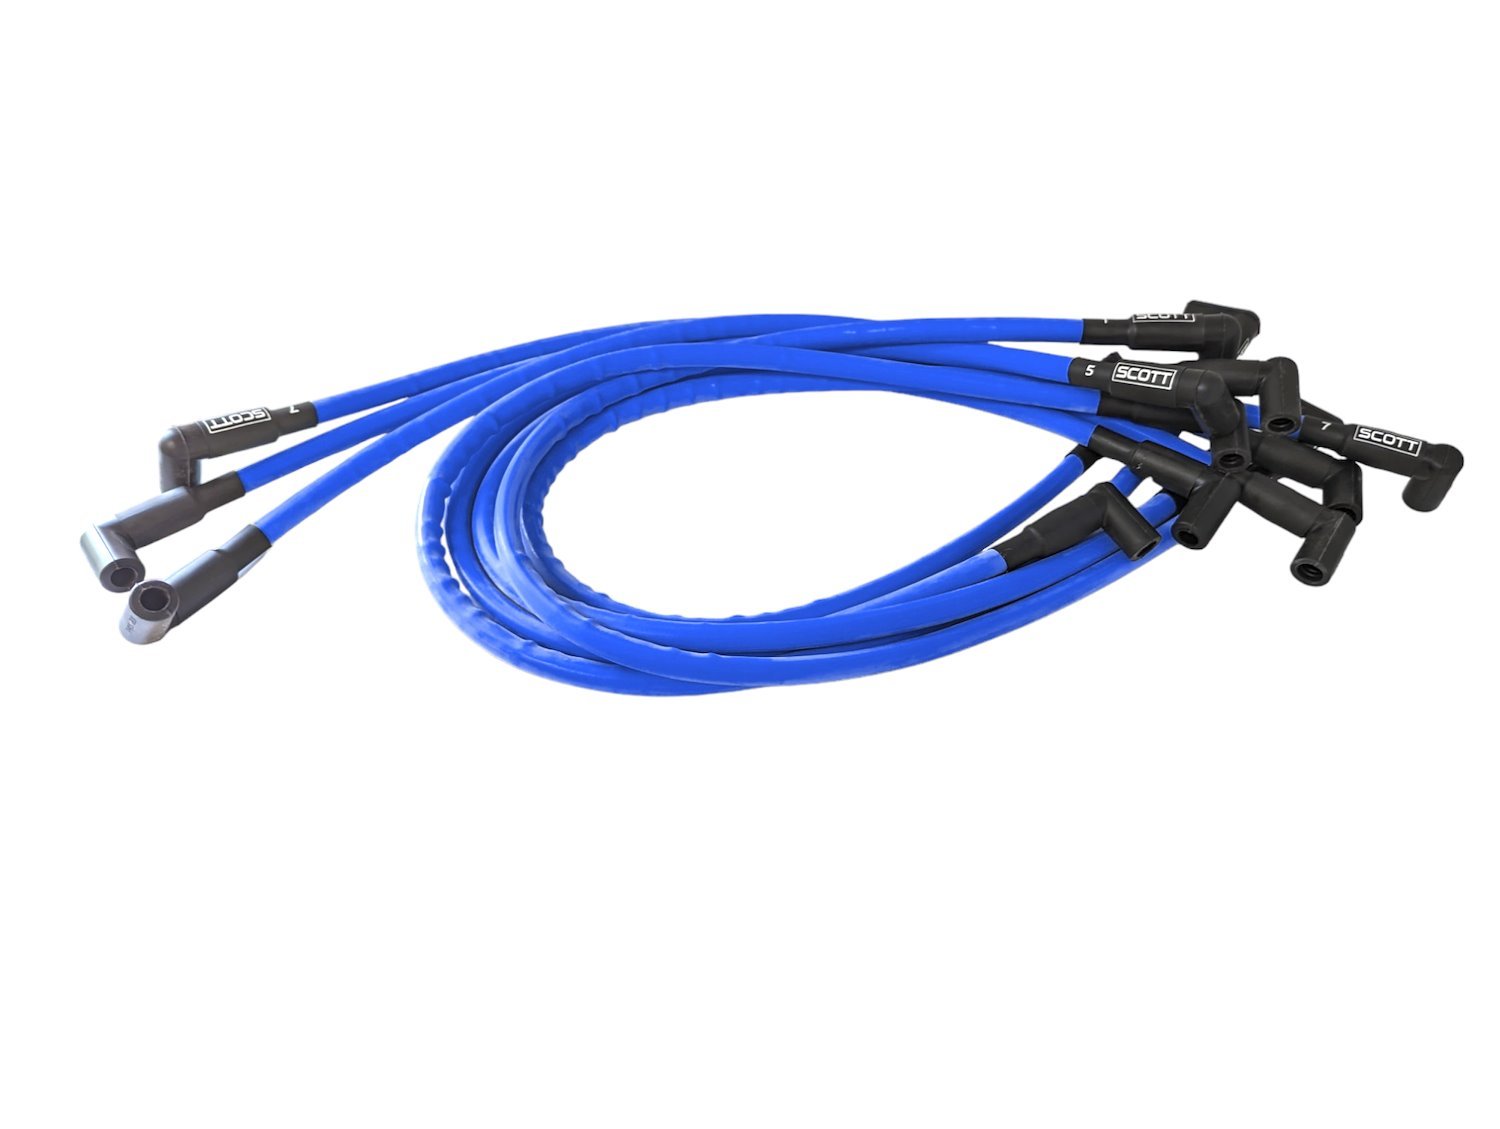 SPW300-CH-604-4 Super Mag Fiberglass-Oversleeved Spark Plug Wire Set for Small Block Chevy 604 Crate, Under Header [Blue]